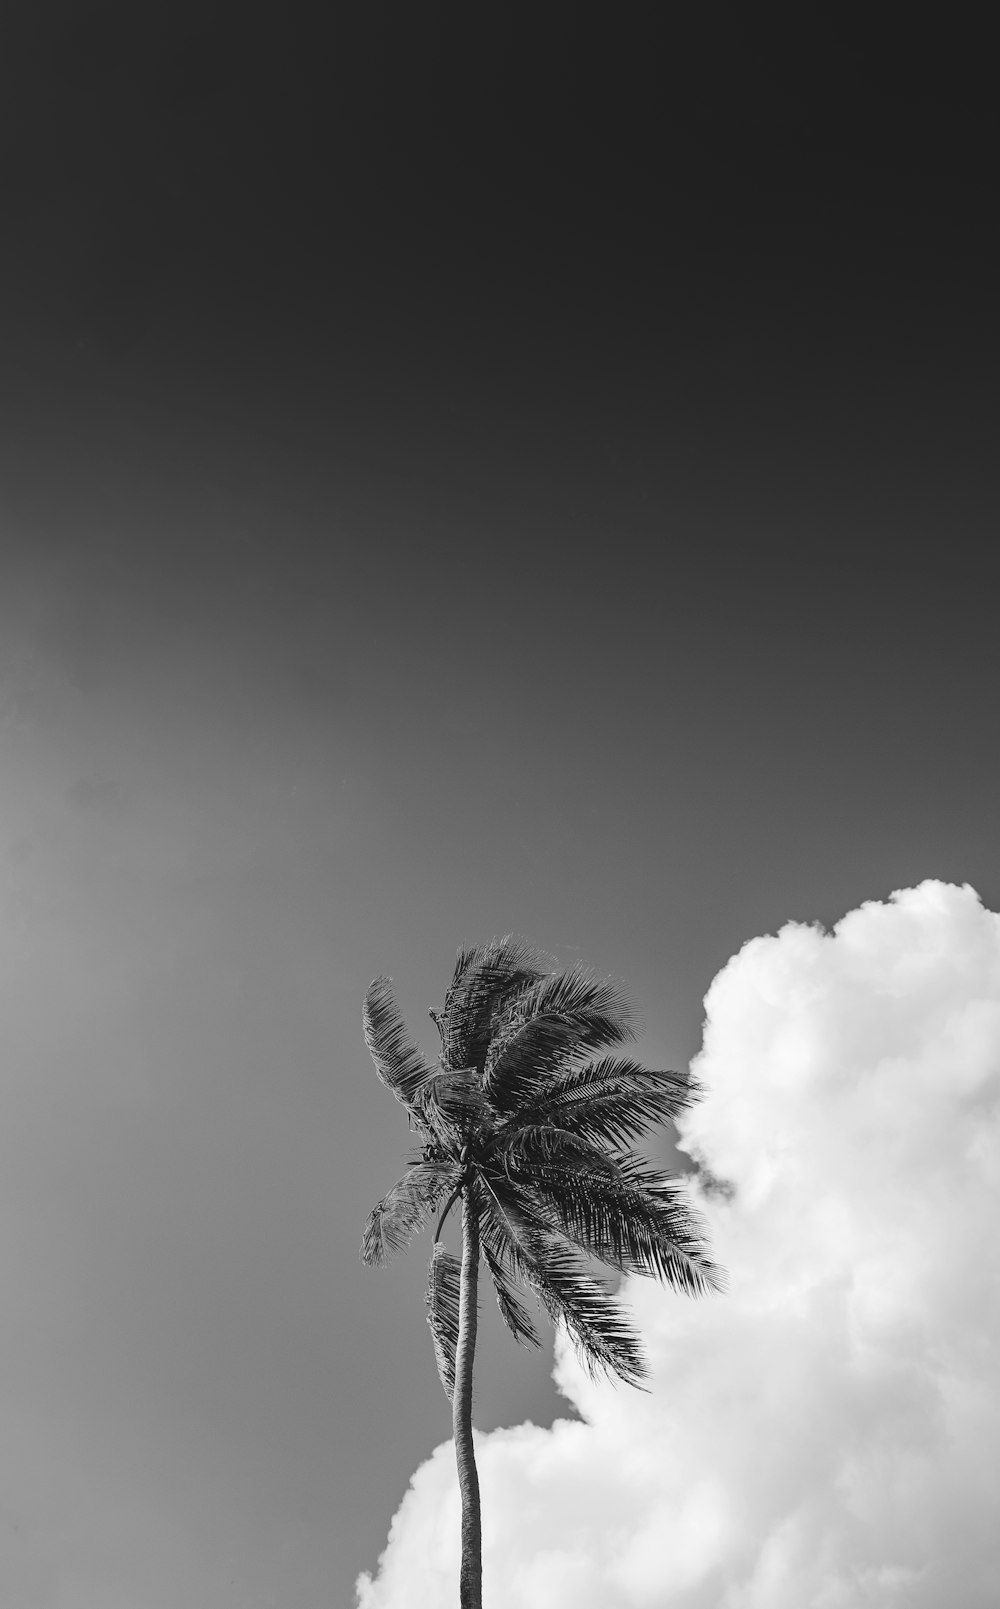 grayscale photo of palm tree under cloudy sky